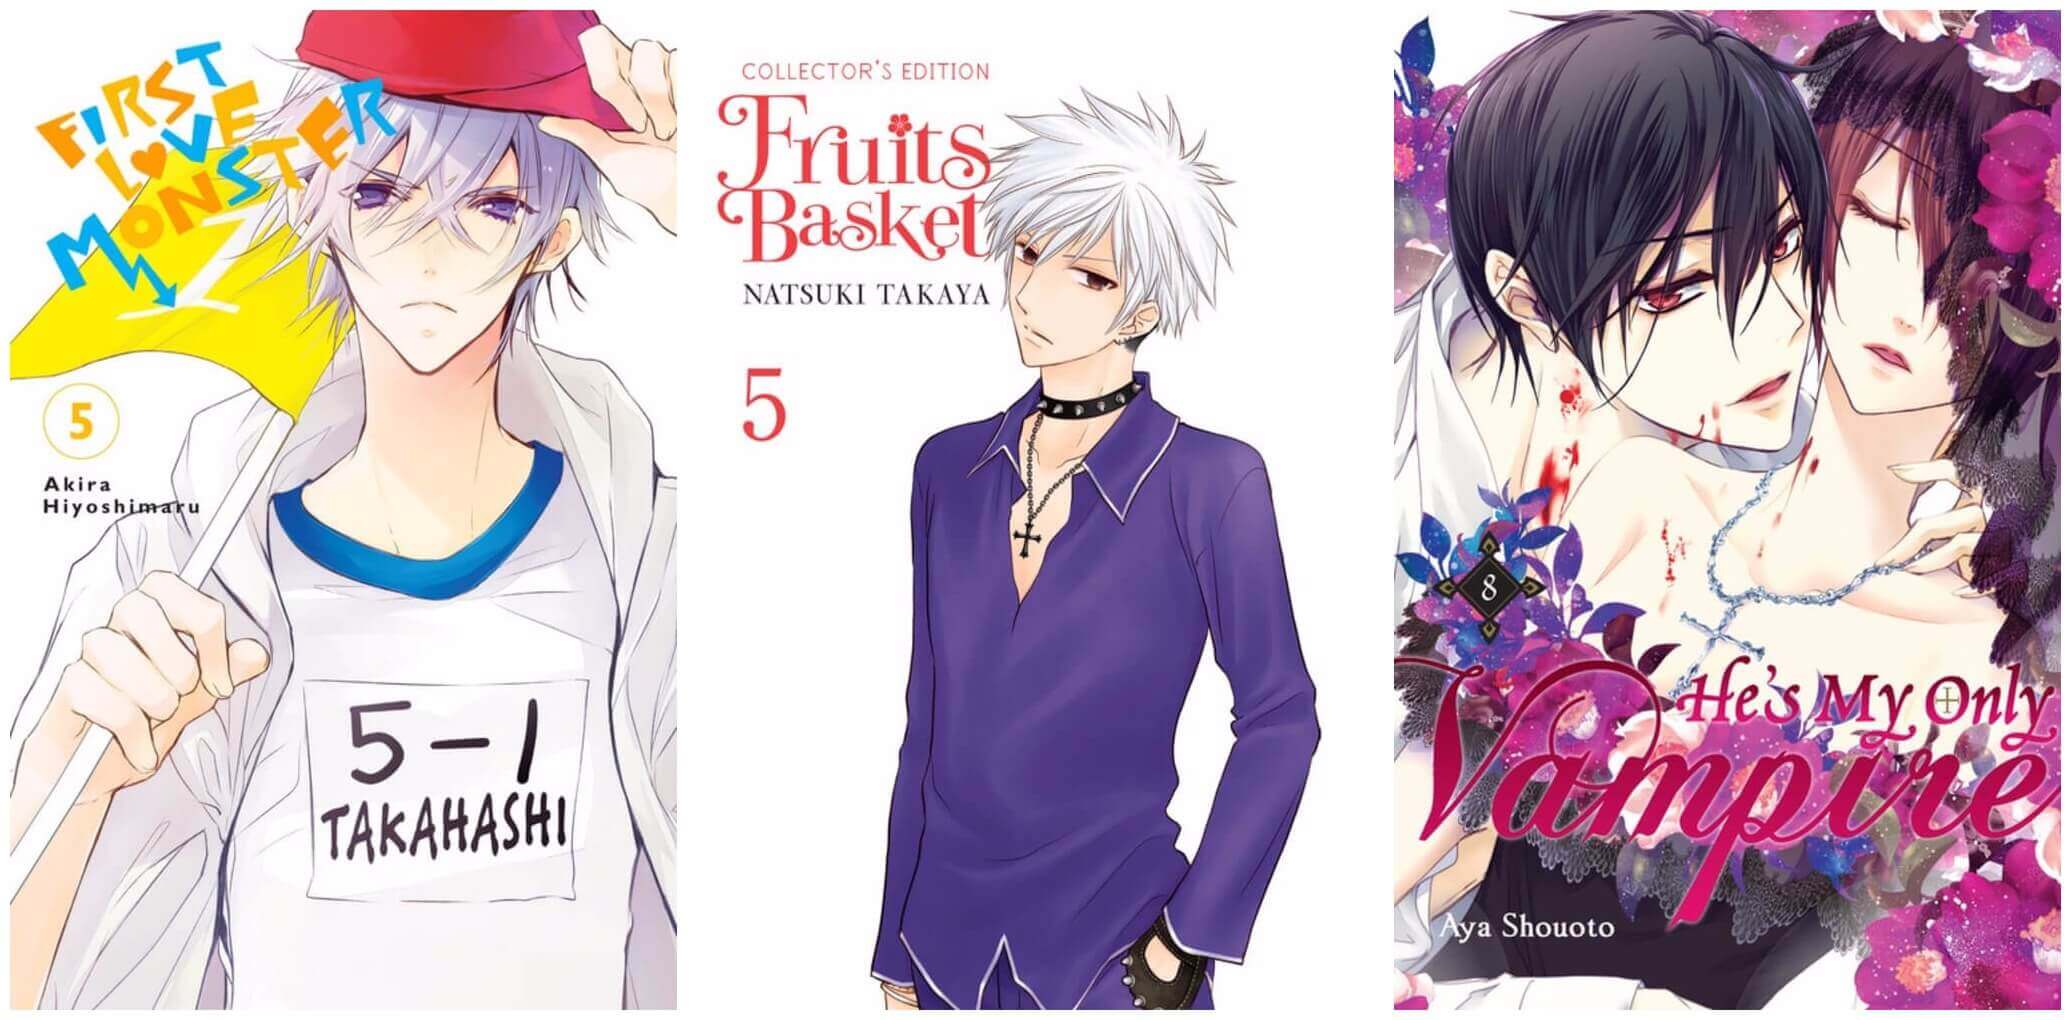 September 2016 Manga Releases Covers for First Love Monster, Fruits Basket, and He's My Only Vampire.